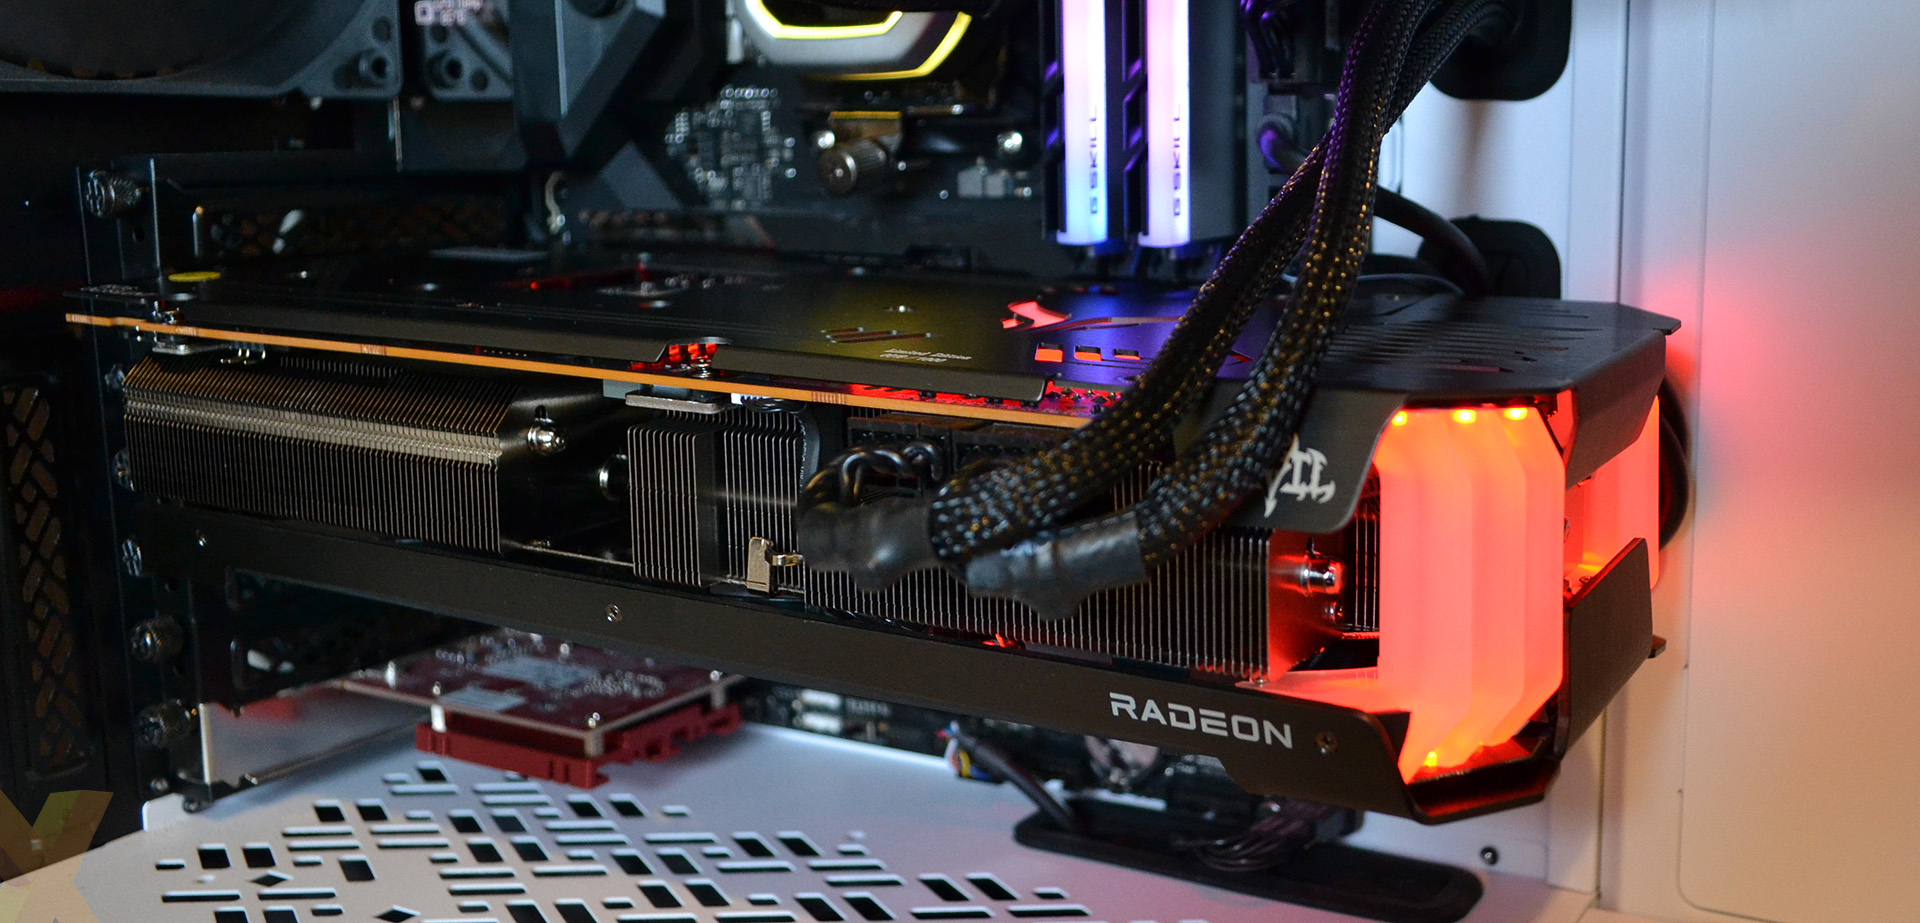 Review: PowerColor Radeon RX 6800 XT Red Devil Limited Edition